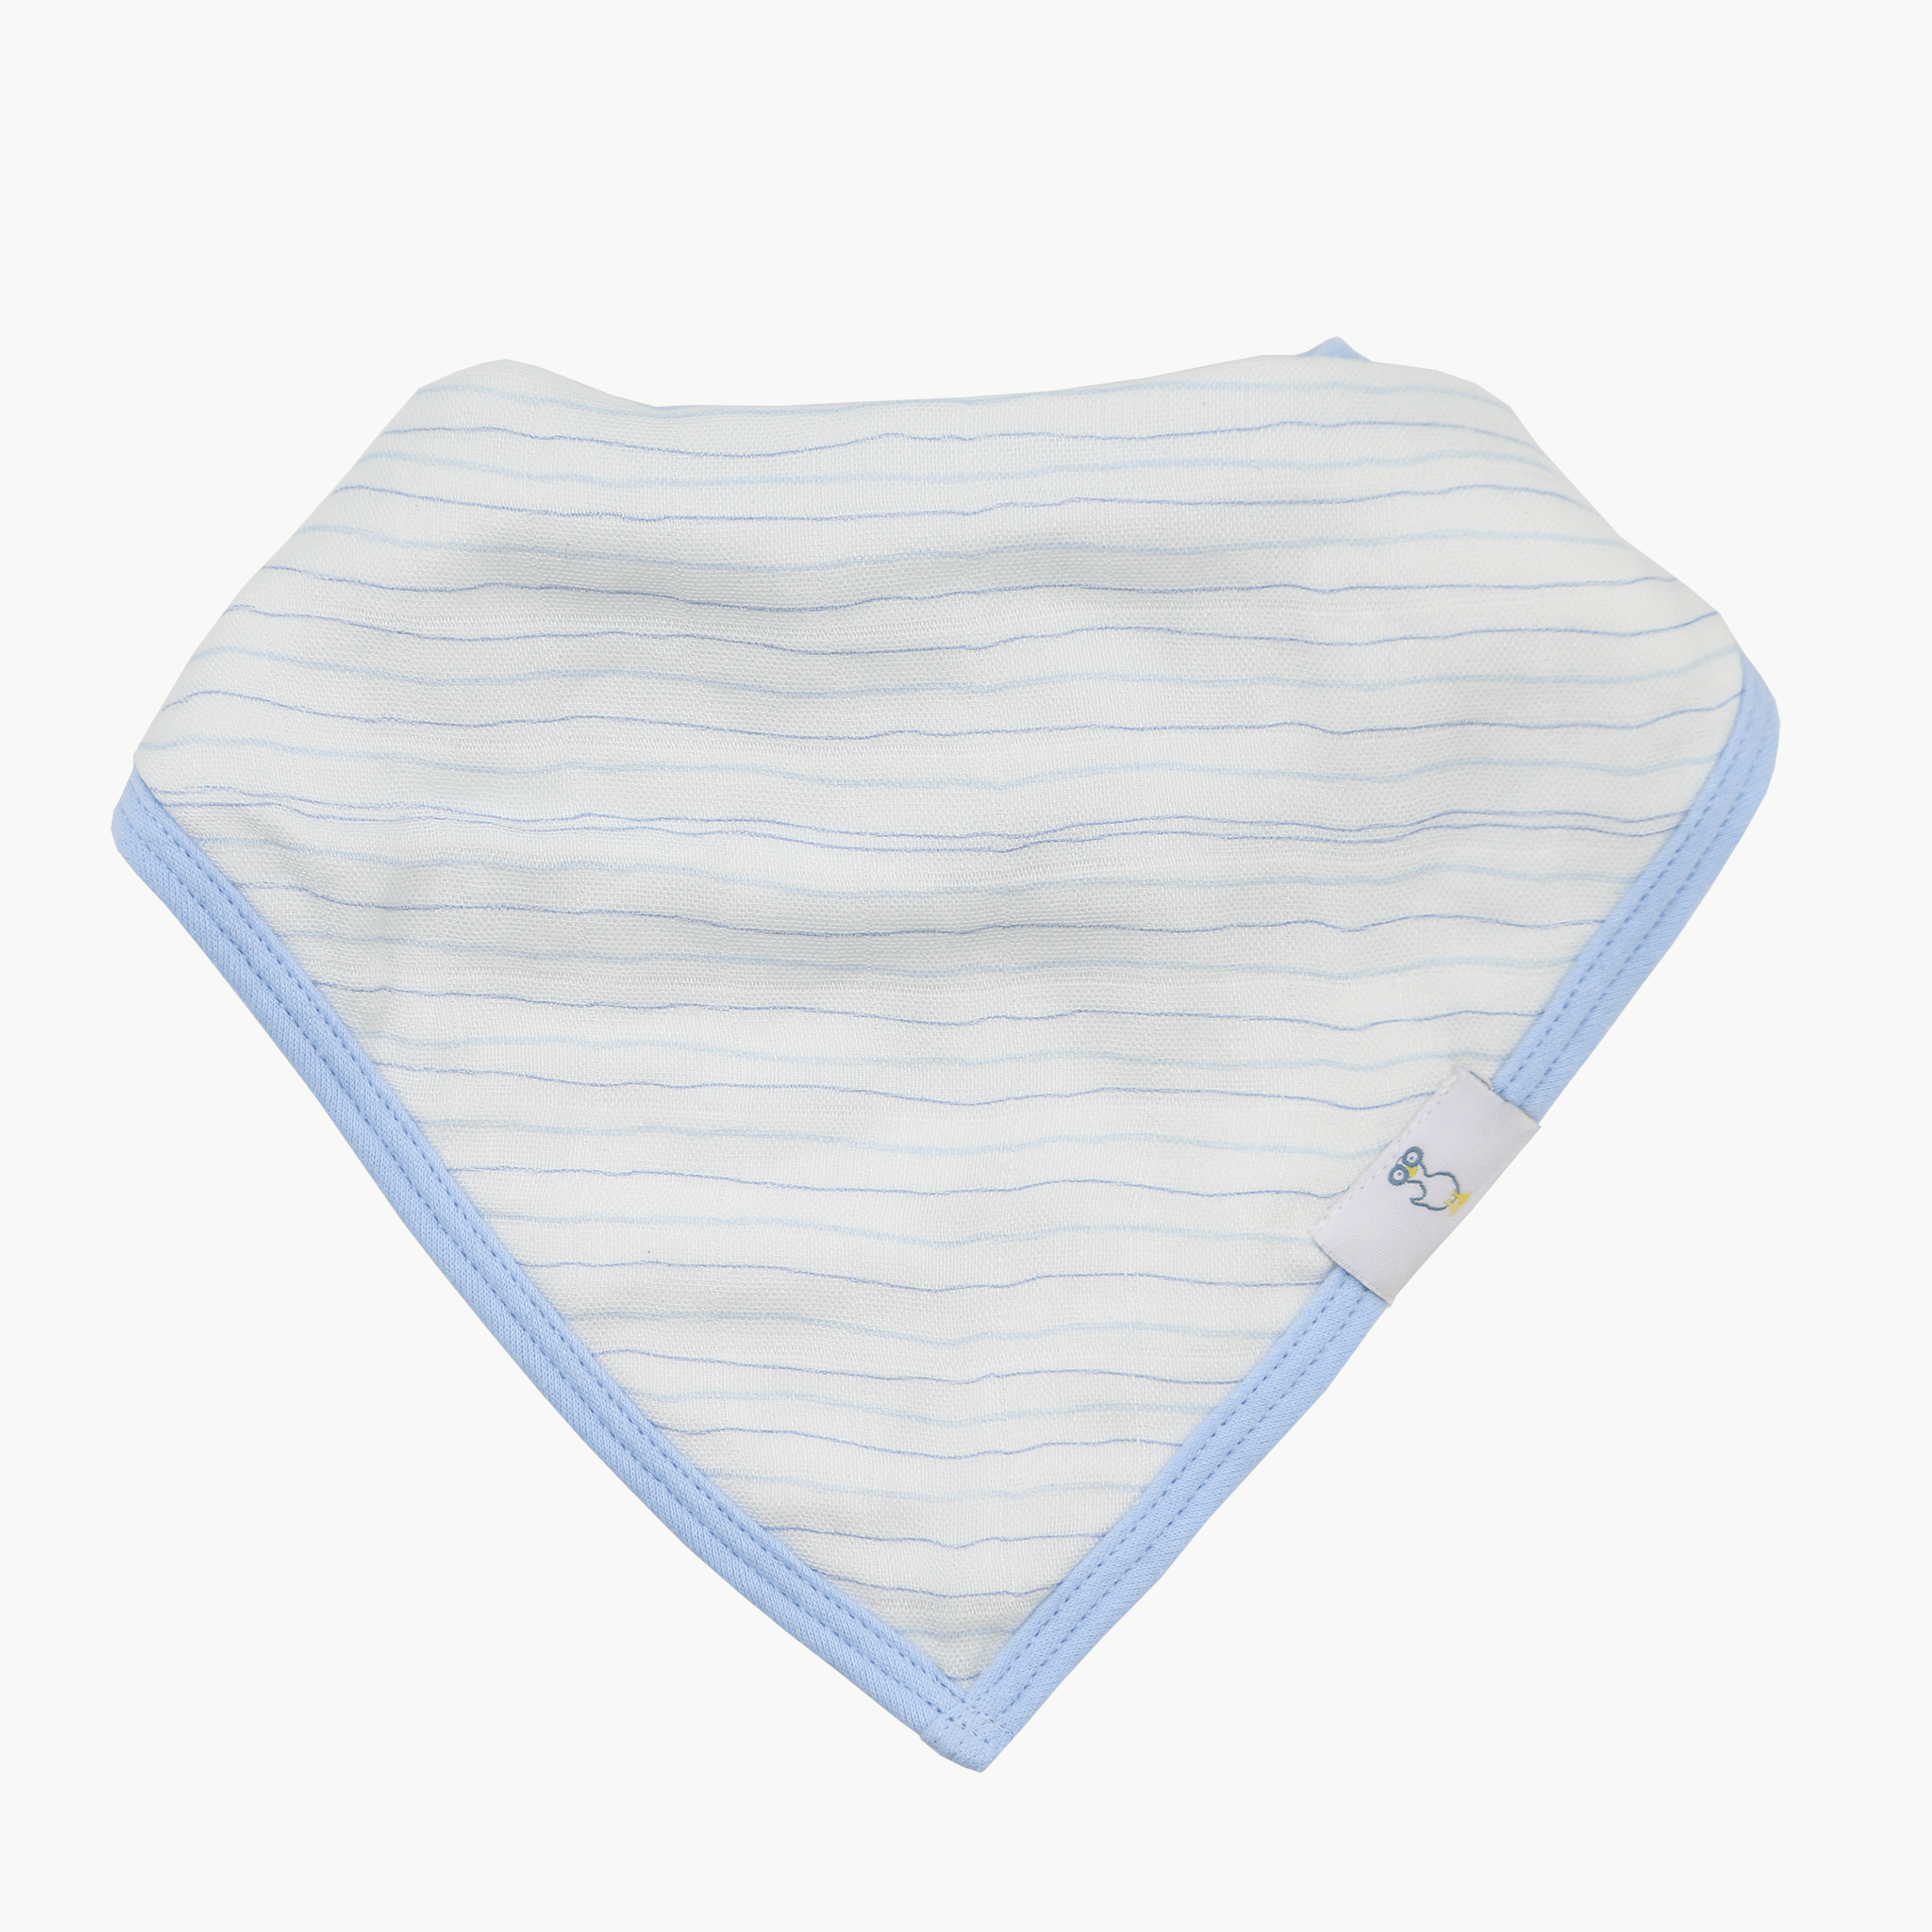 Popsicle and Stripes Blue 2 Pack Muslin & Terry Cloth Bib Set